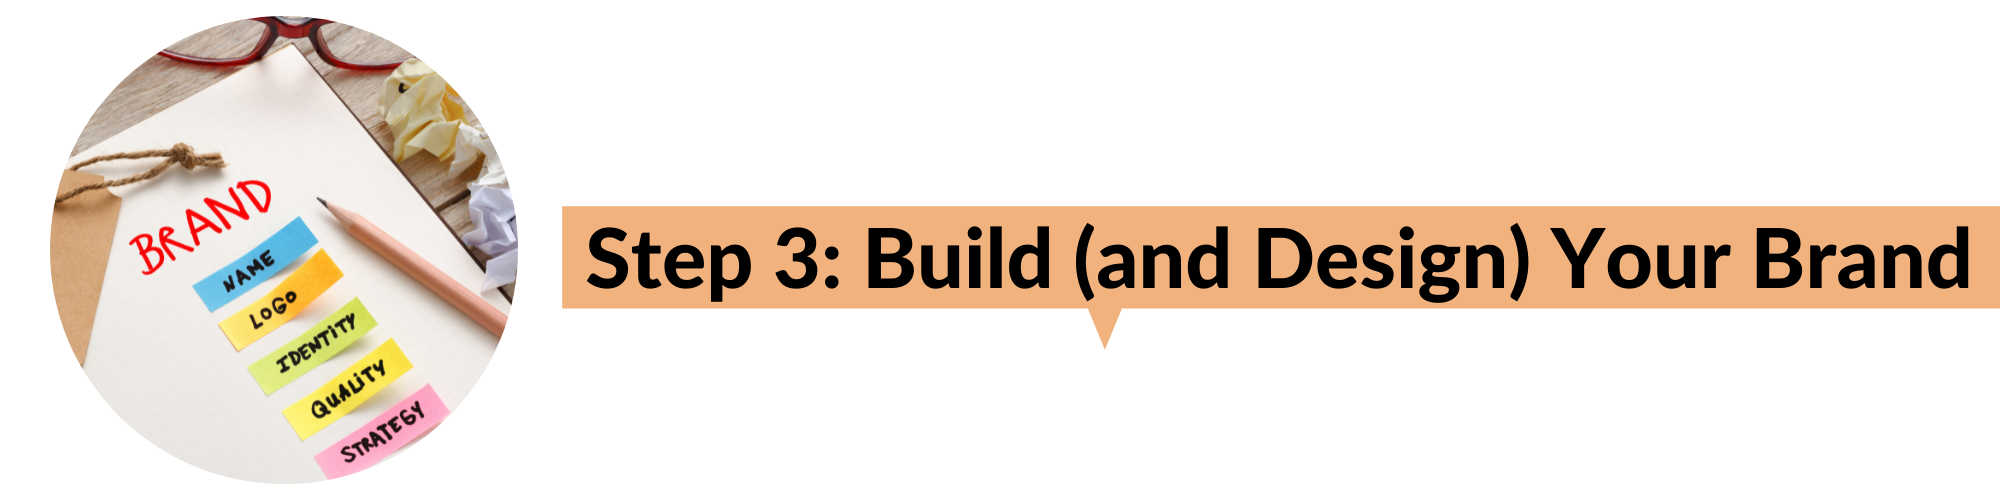 Step Three: Build (and Design) Your Brand with an image how to build it